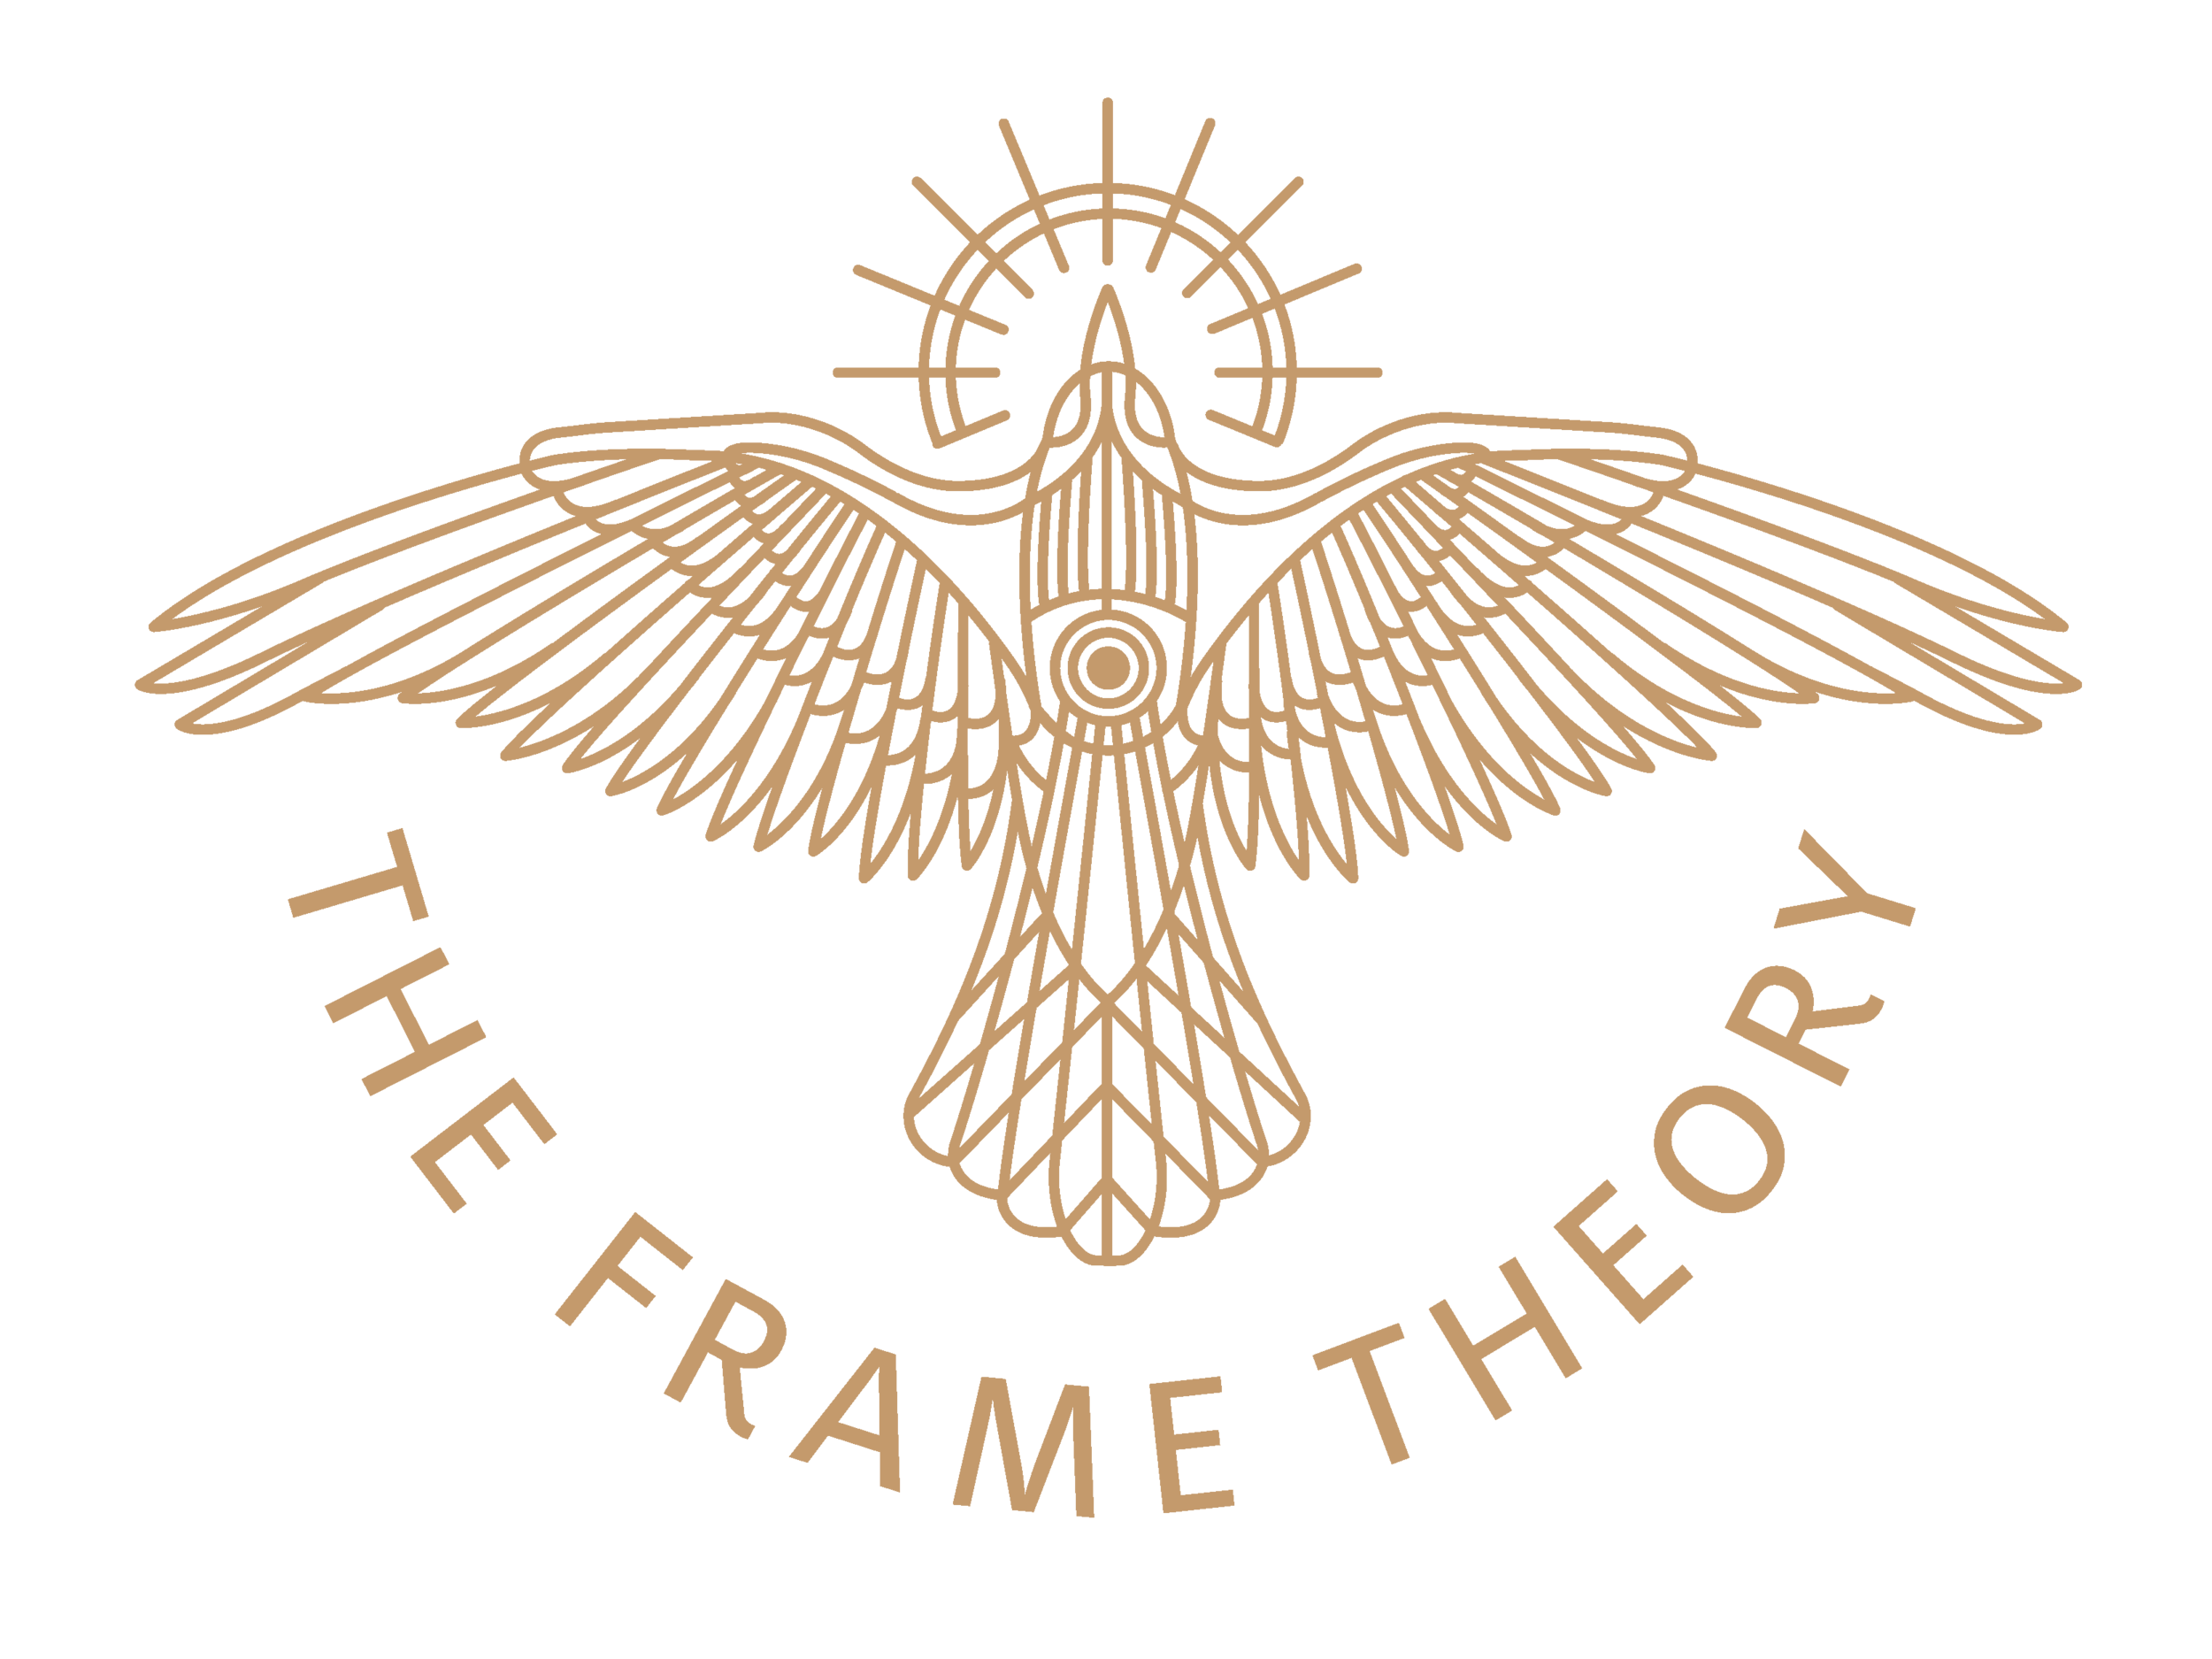 The Frame Theory